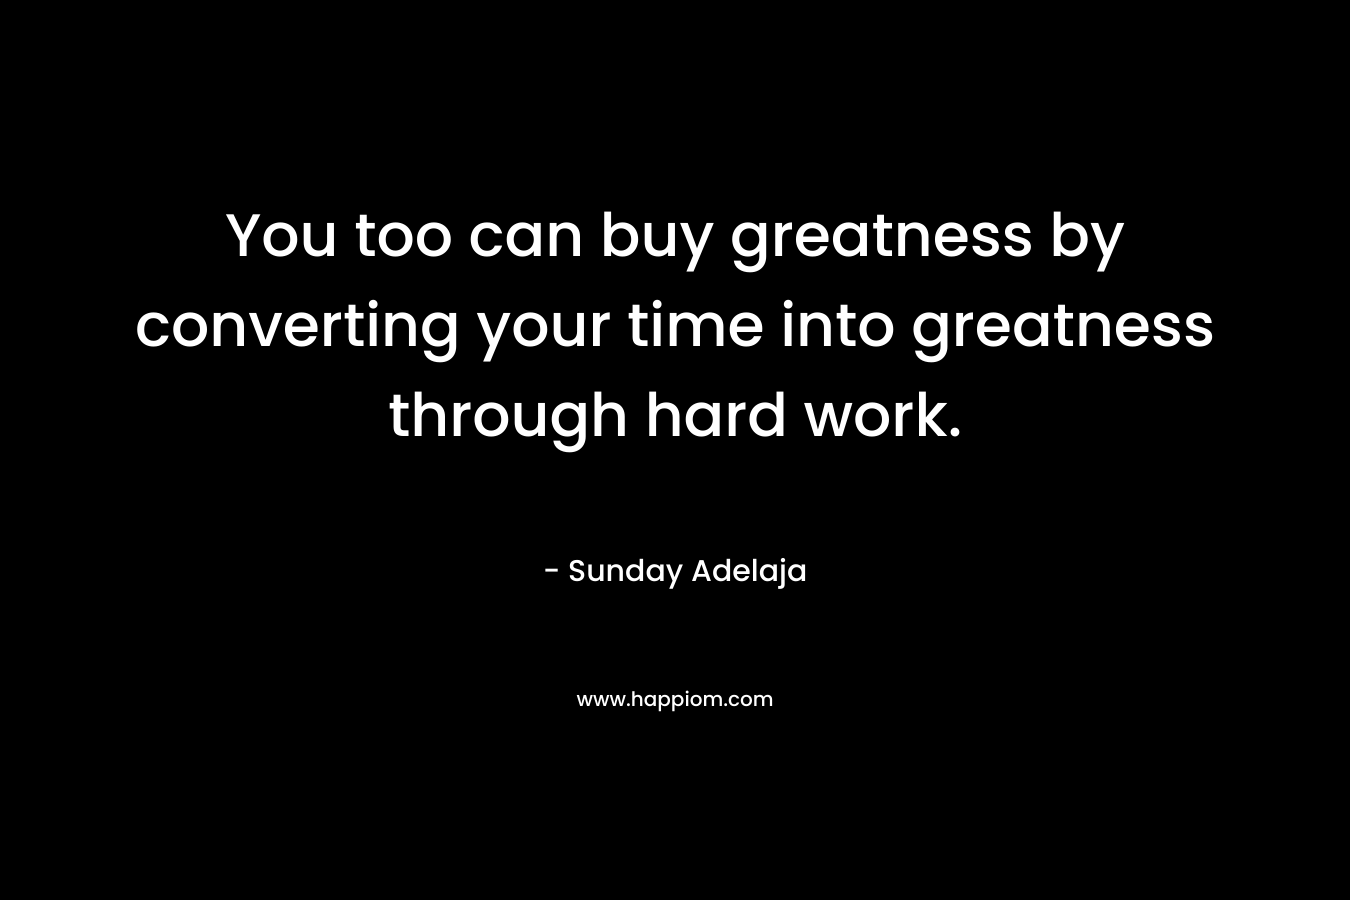 You too can buy greatness by converting your time into greatness through hard work. – Sunday Adelaja